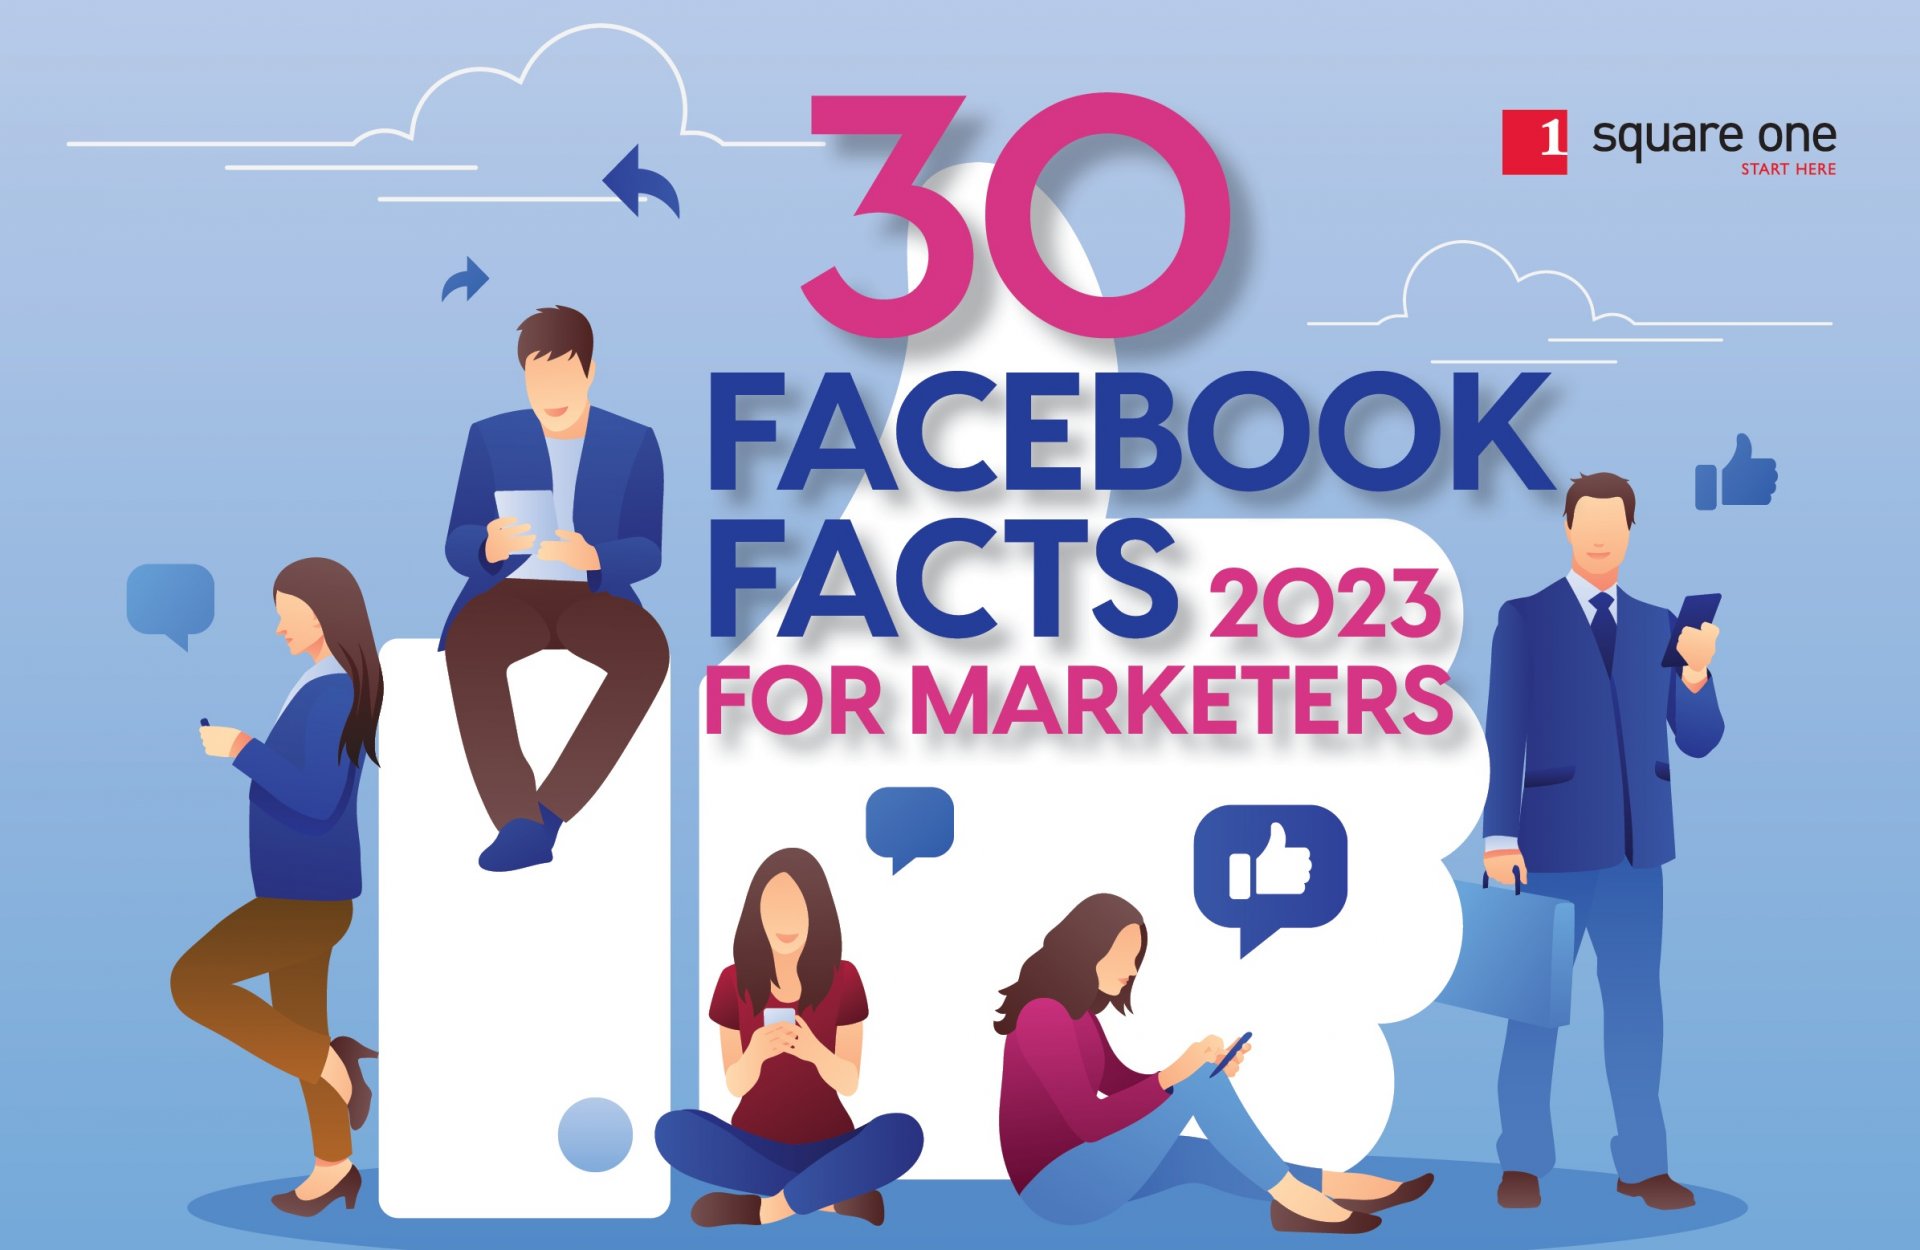 30 Facebook Facts Infographic